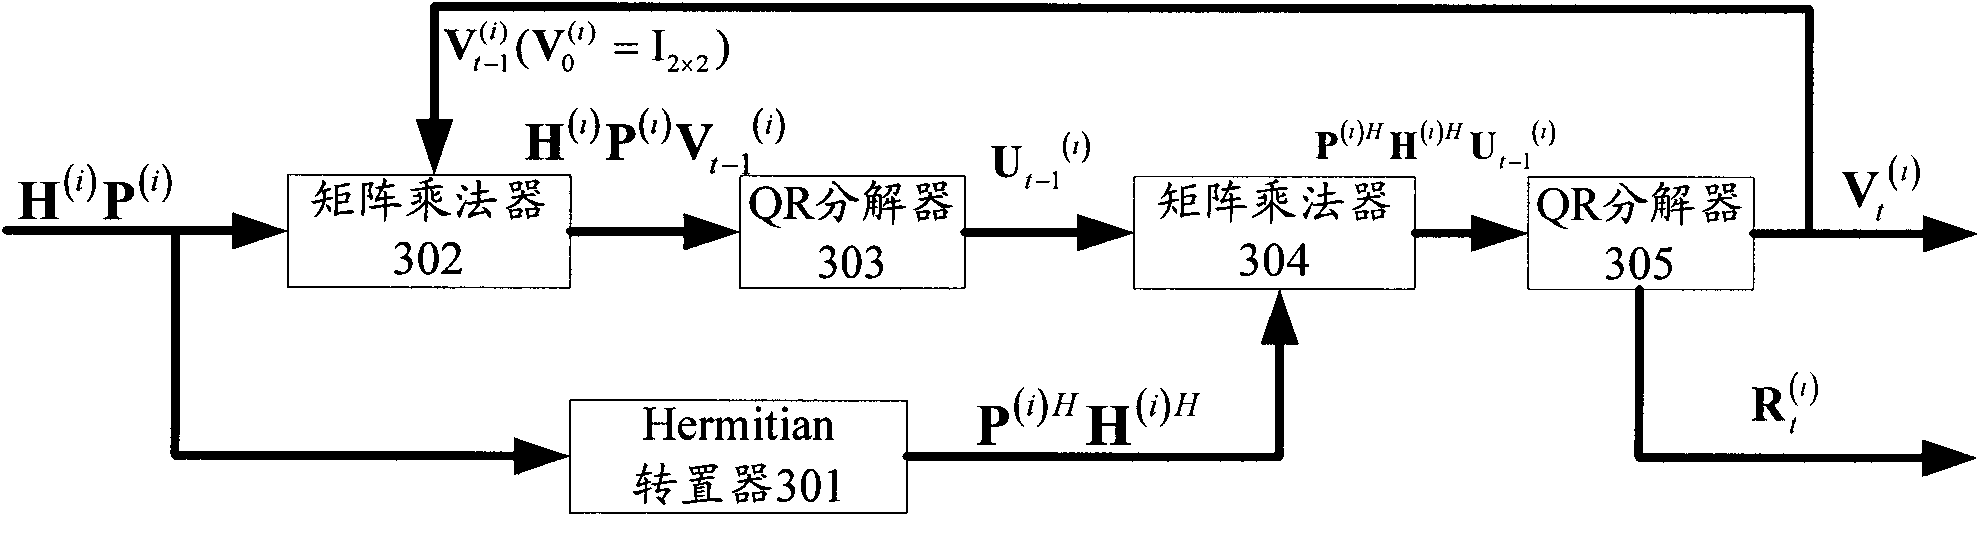 Multi-user MIMO transmission method in wireless communication system, base station and user terminal